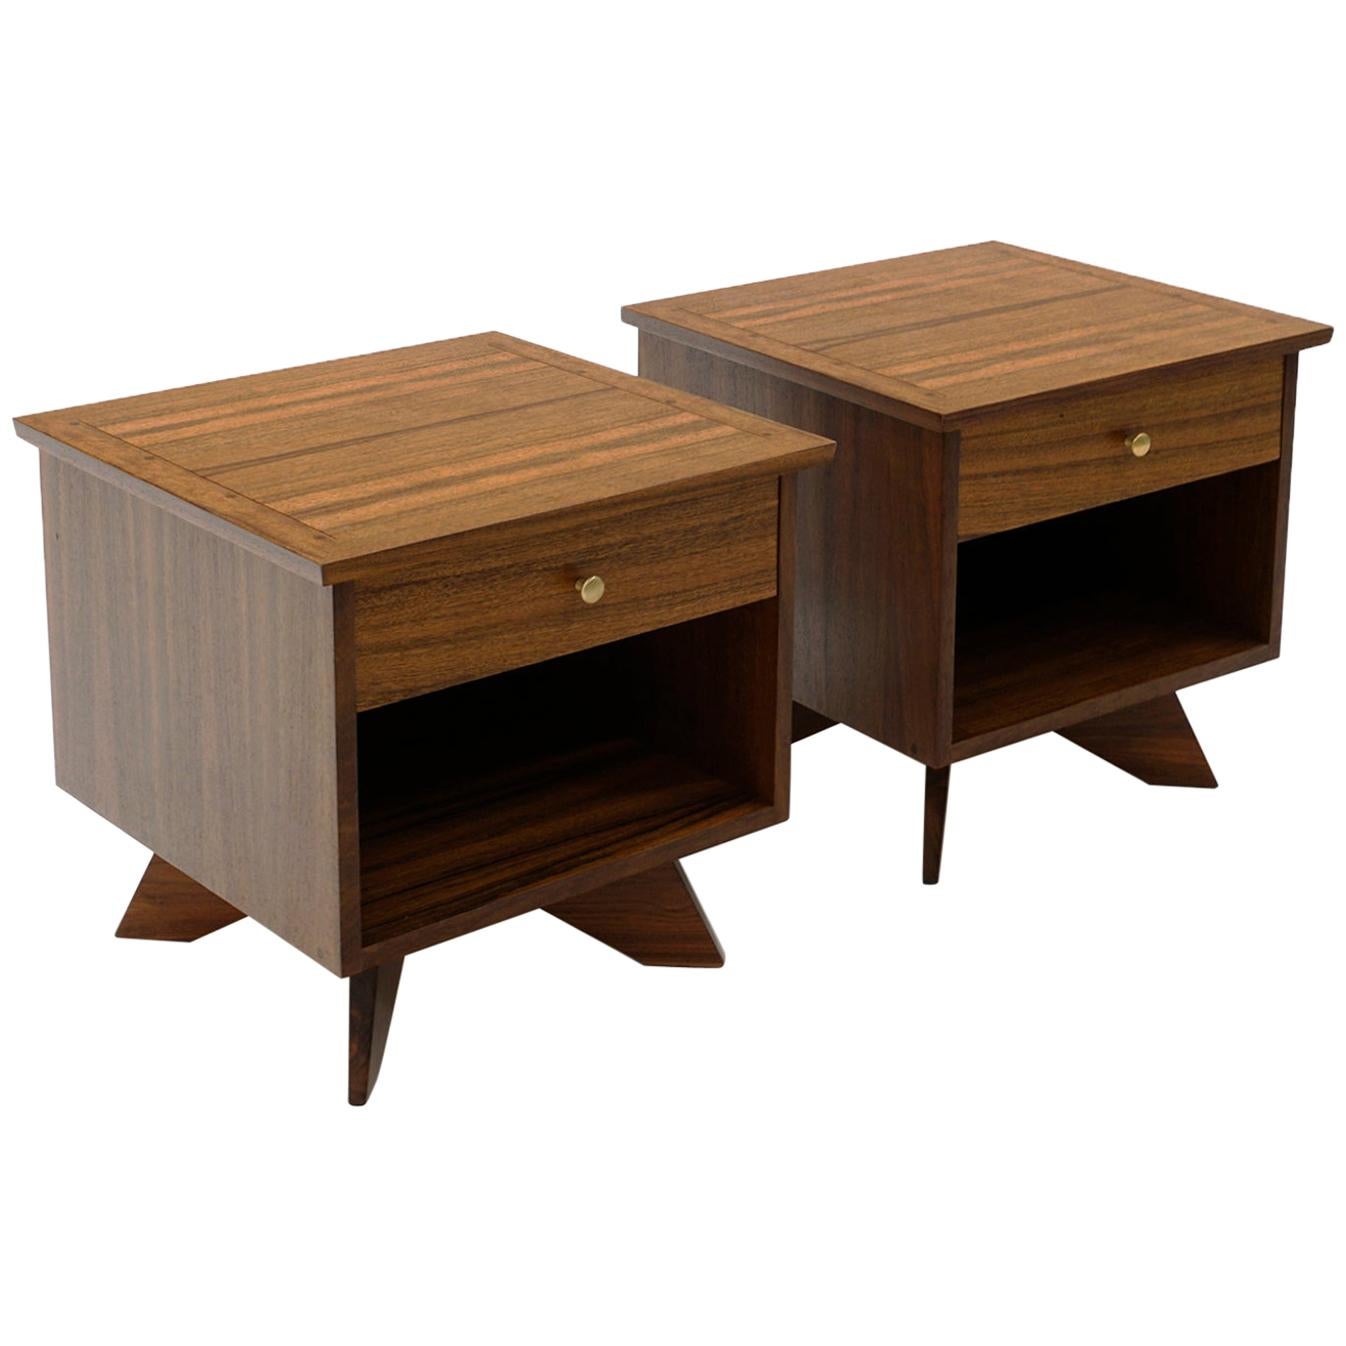 Pair of Nightstands with Drawer by George Nakashima for Widdicomb, Beautiful